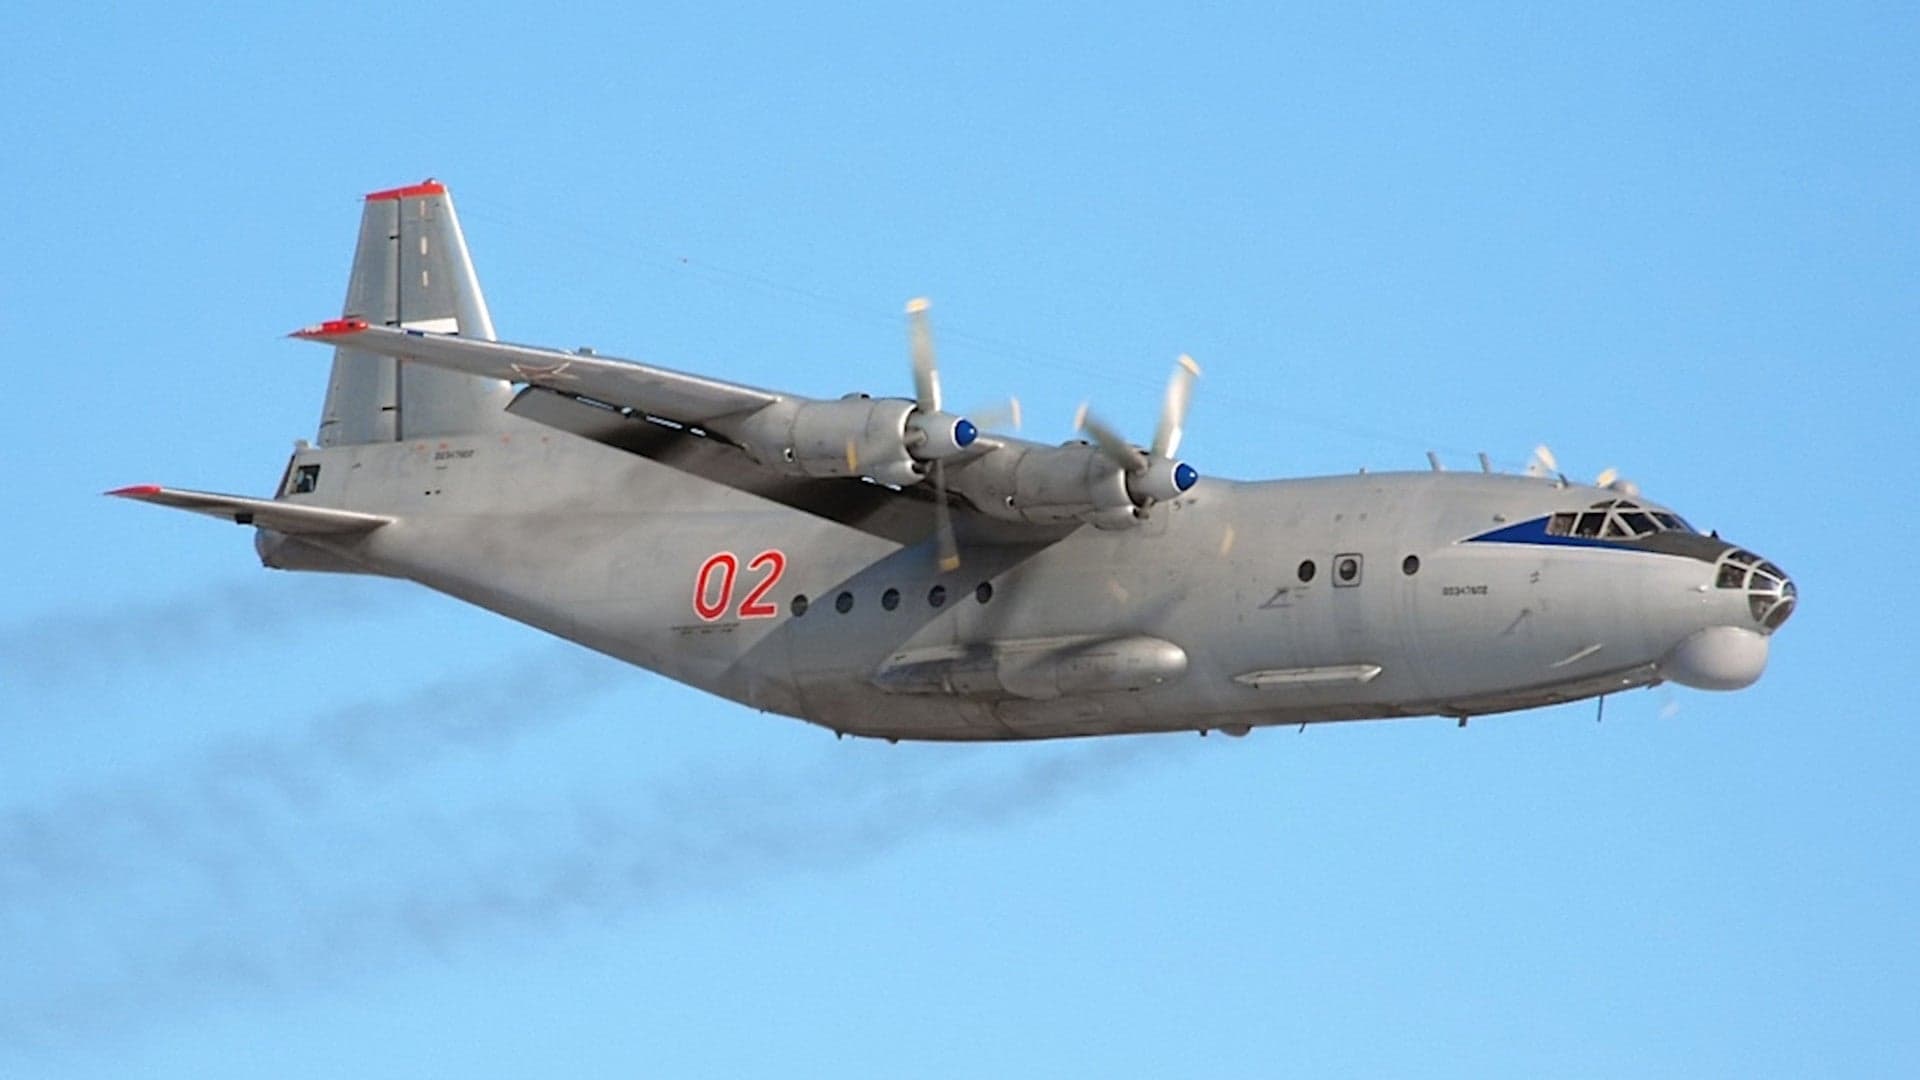 Russia Reportedly Developing Its Own AC-130-Like Gunship From Converted An-12 Cargo Planes